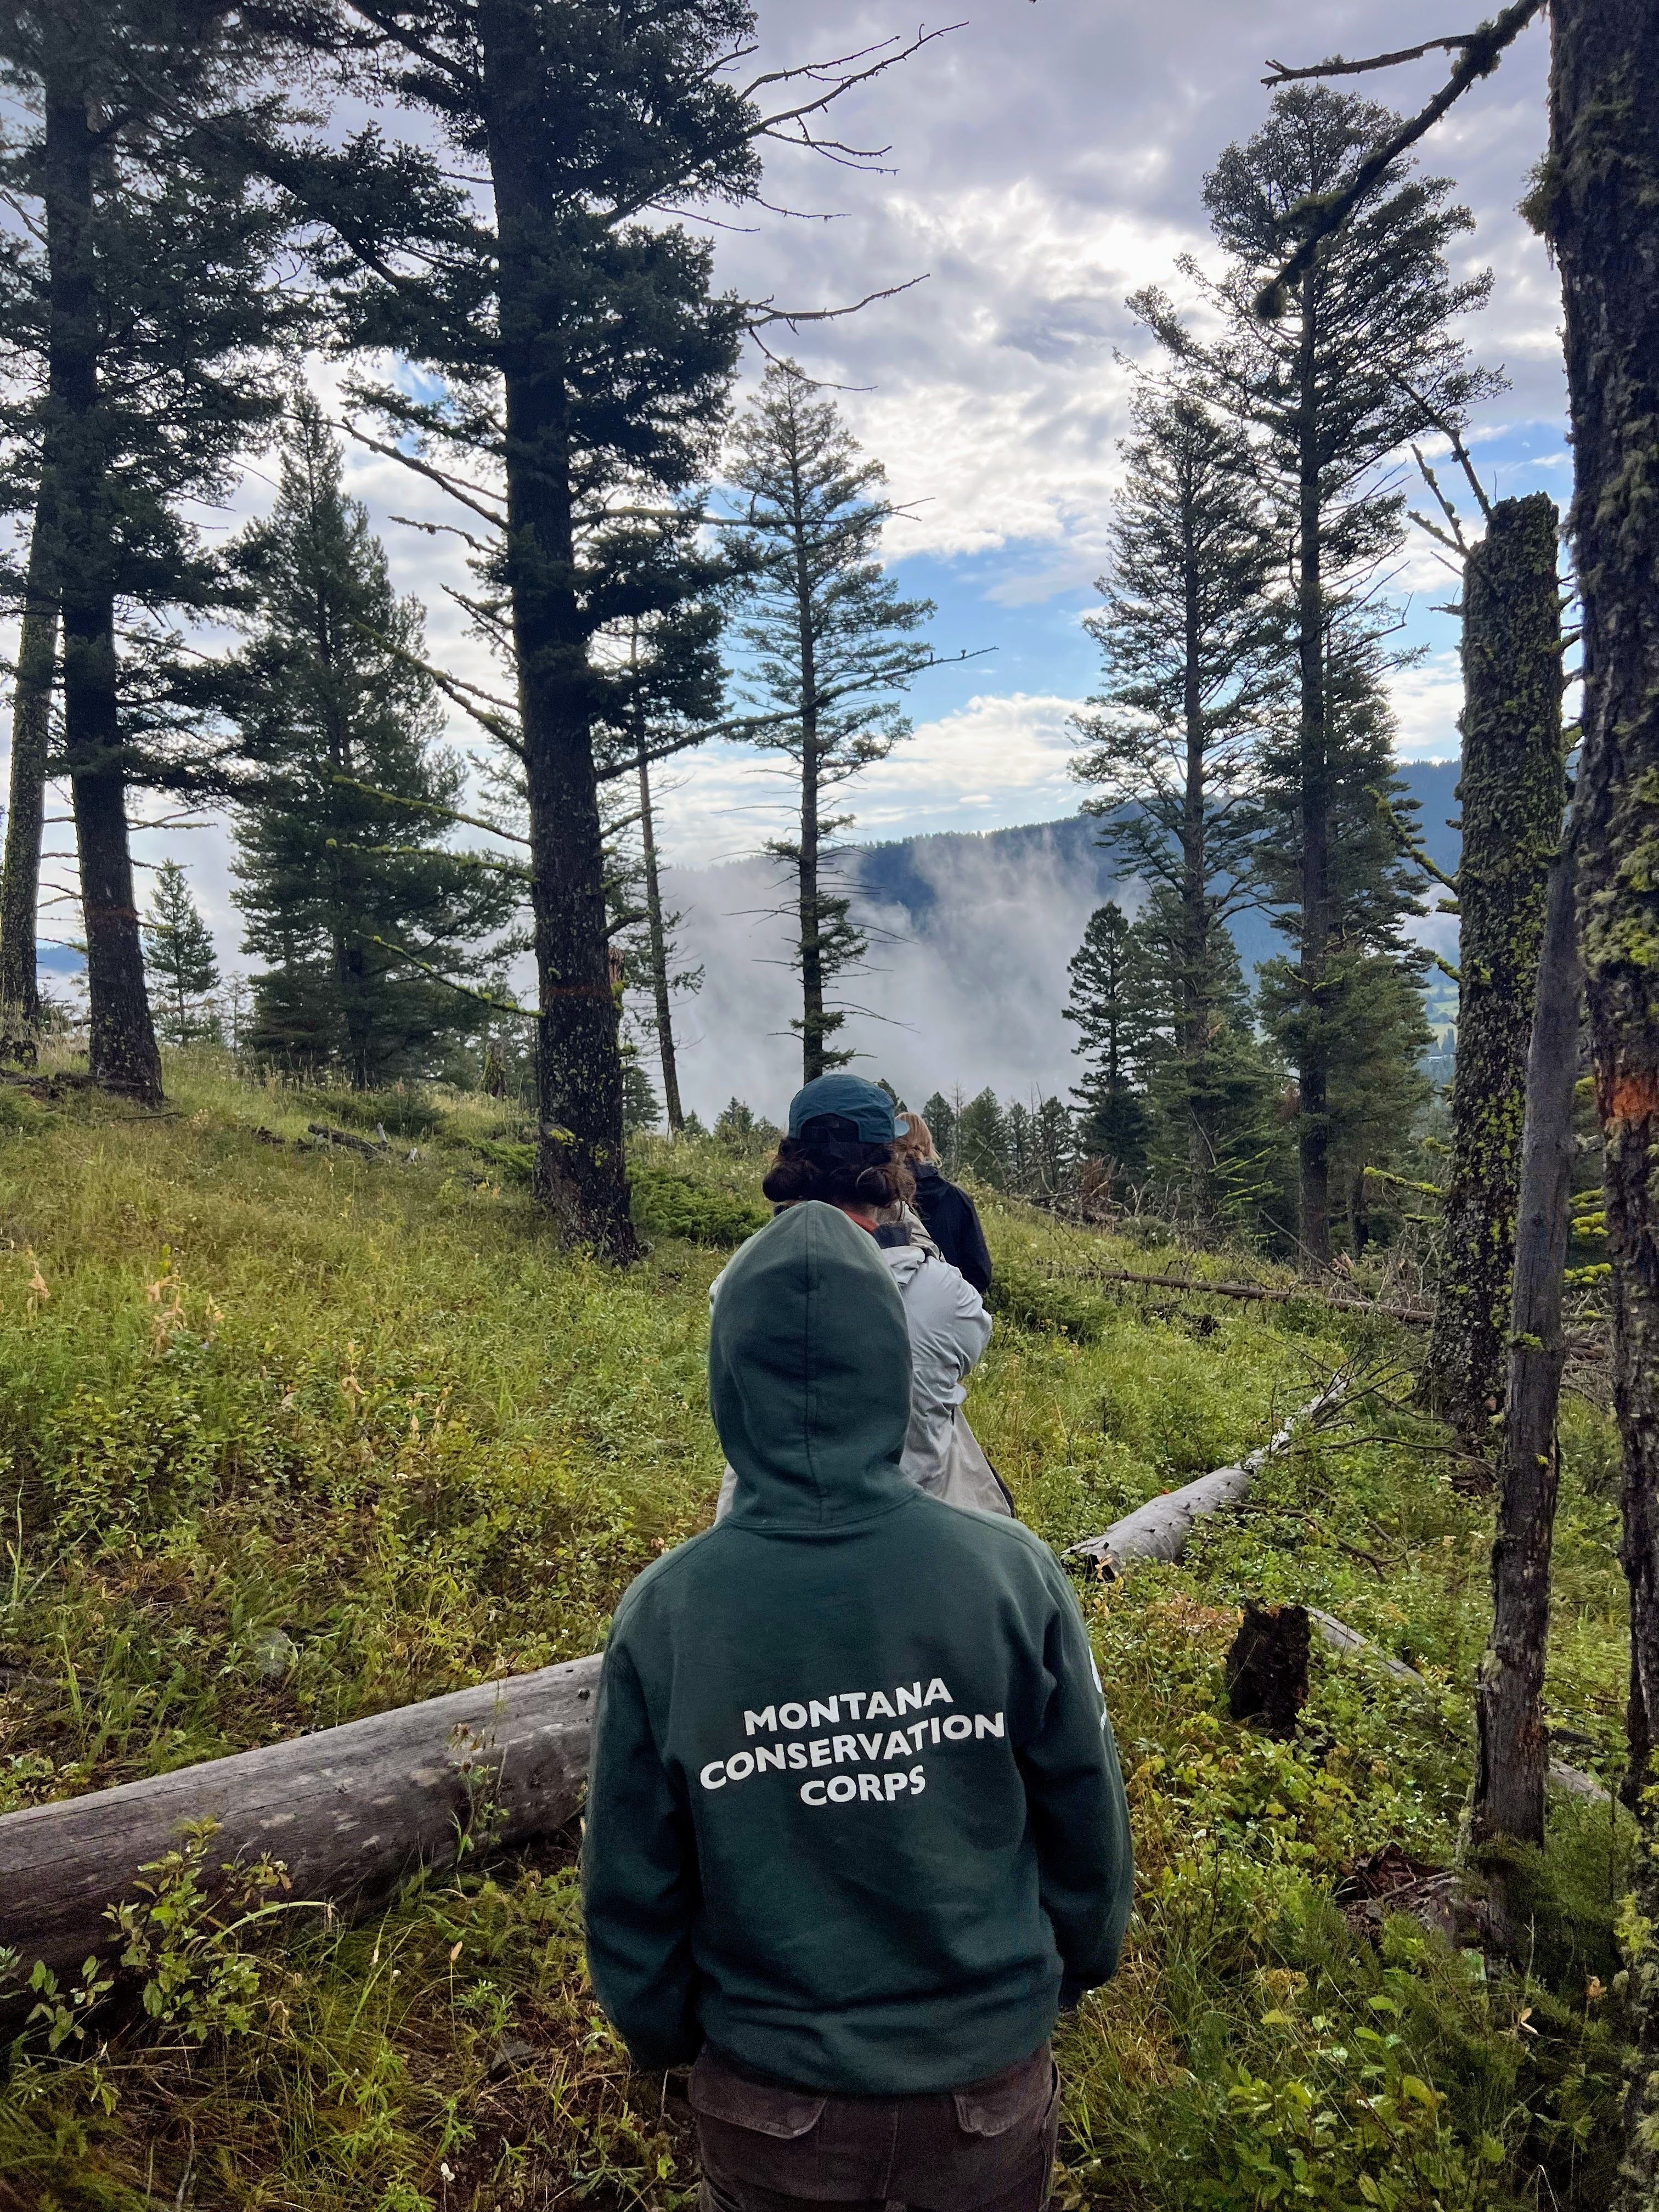 Crew members walking down a trail. The member closest to the camera has a sweatshirt with "Montana Conservation Corps" on the back.